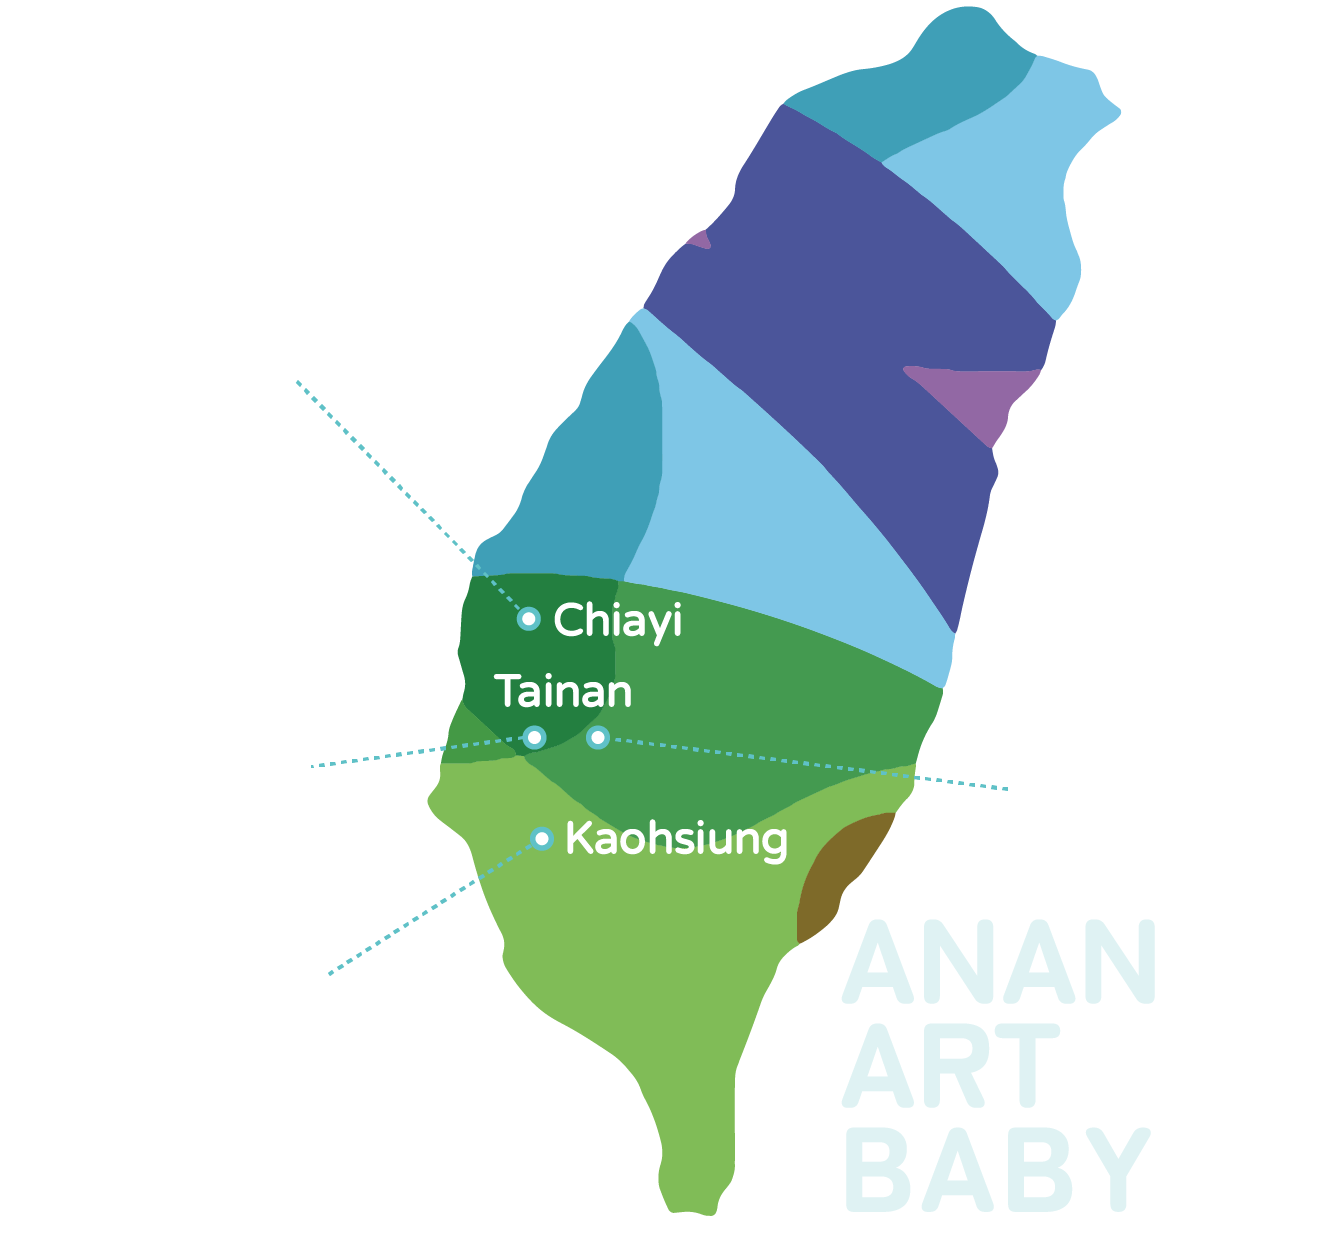 AN-AN Art Baby Reproductive Medicine Group-Group Distribution Map